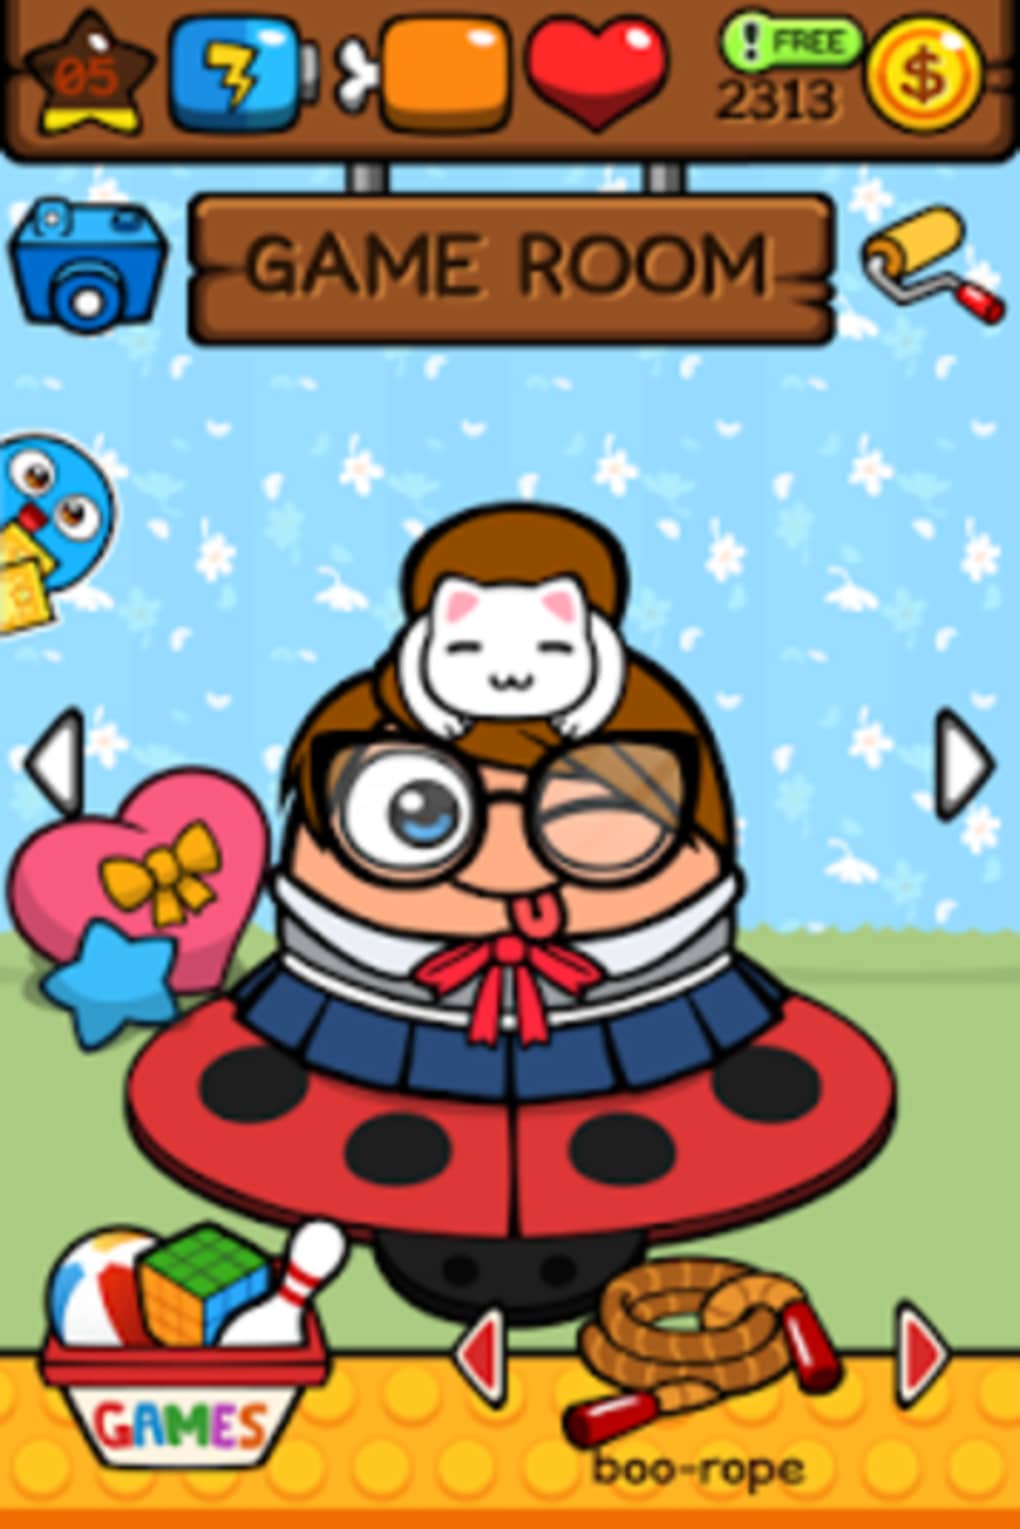 My Boo, Your Virtual Pet Game Pou Android, my talking tom, video Game,  smiley, emoticon png